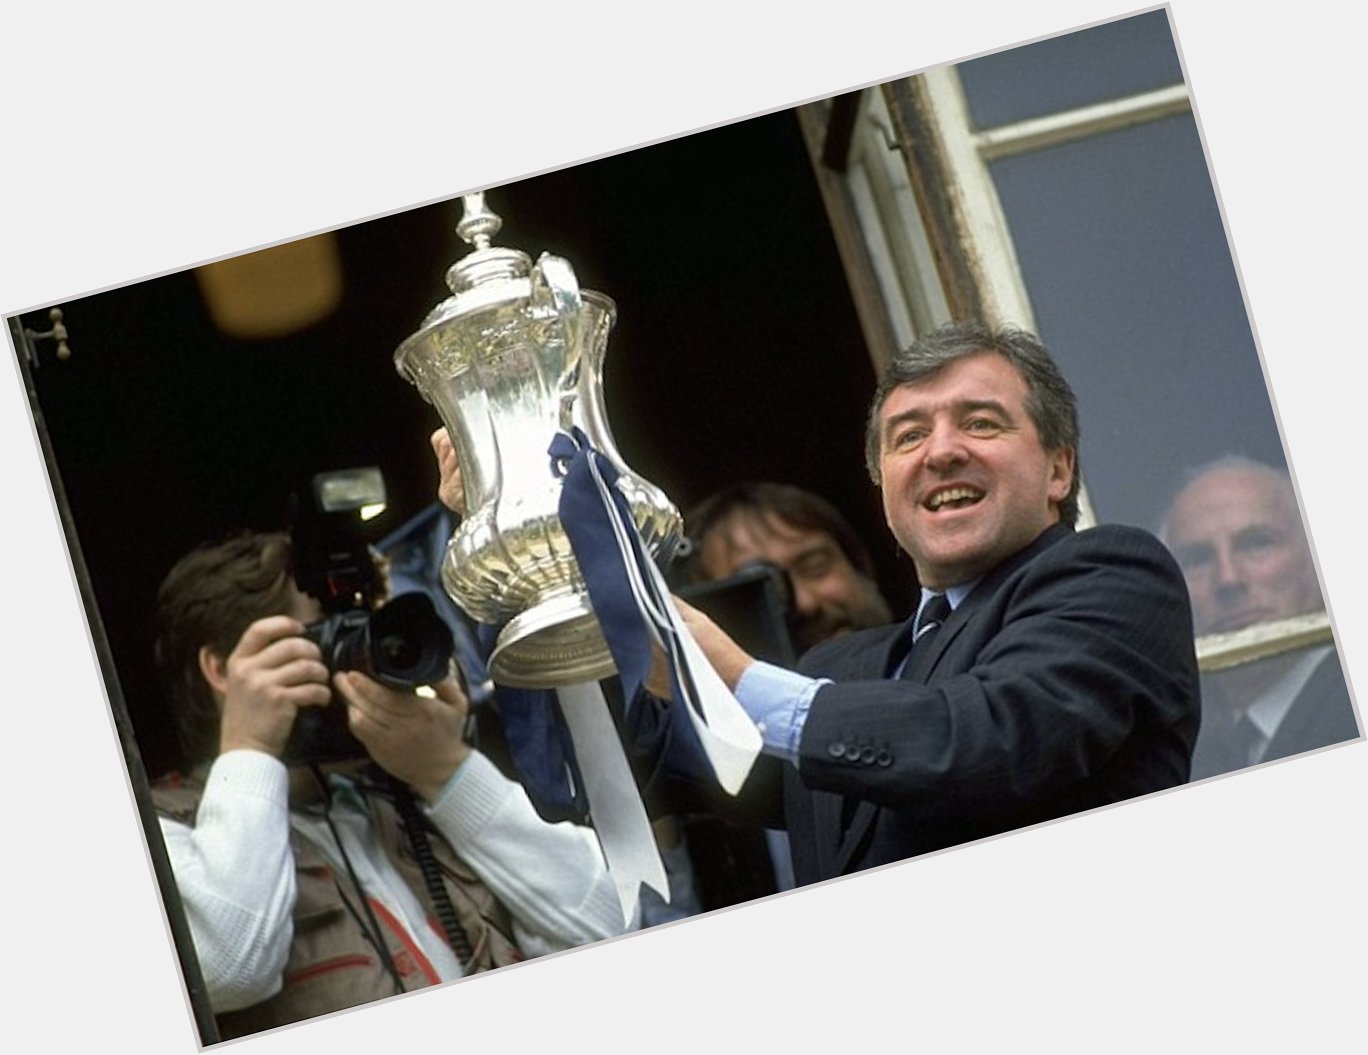 Former England manager Terry Venables celebrates his 76th birthday today

Happy birthday, El Tel 